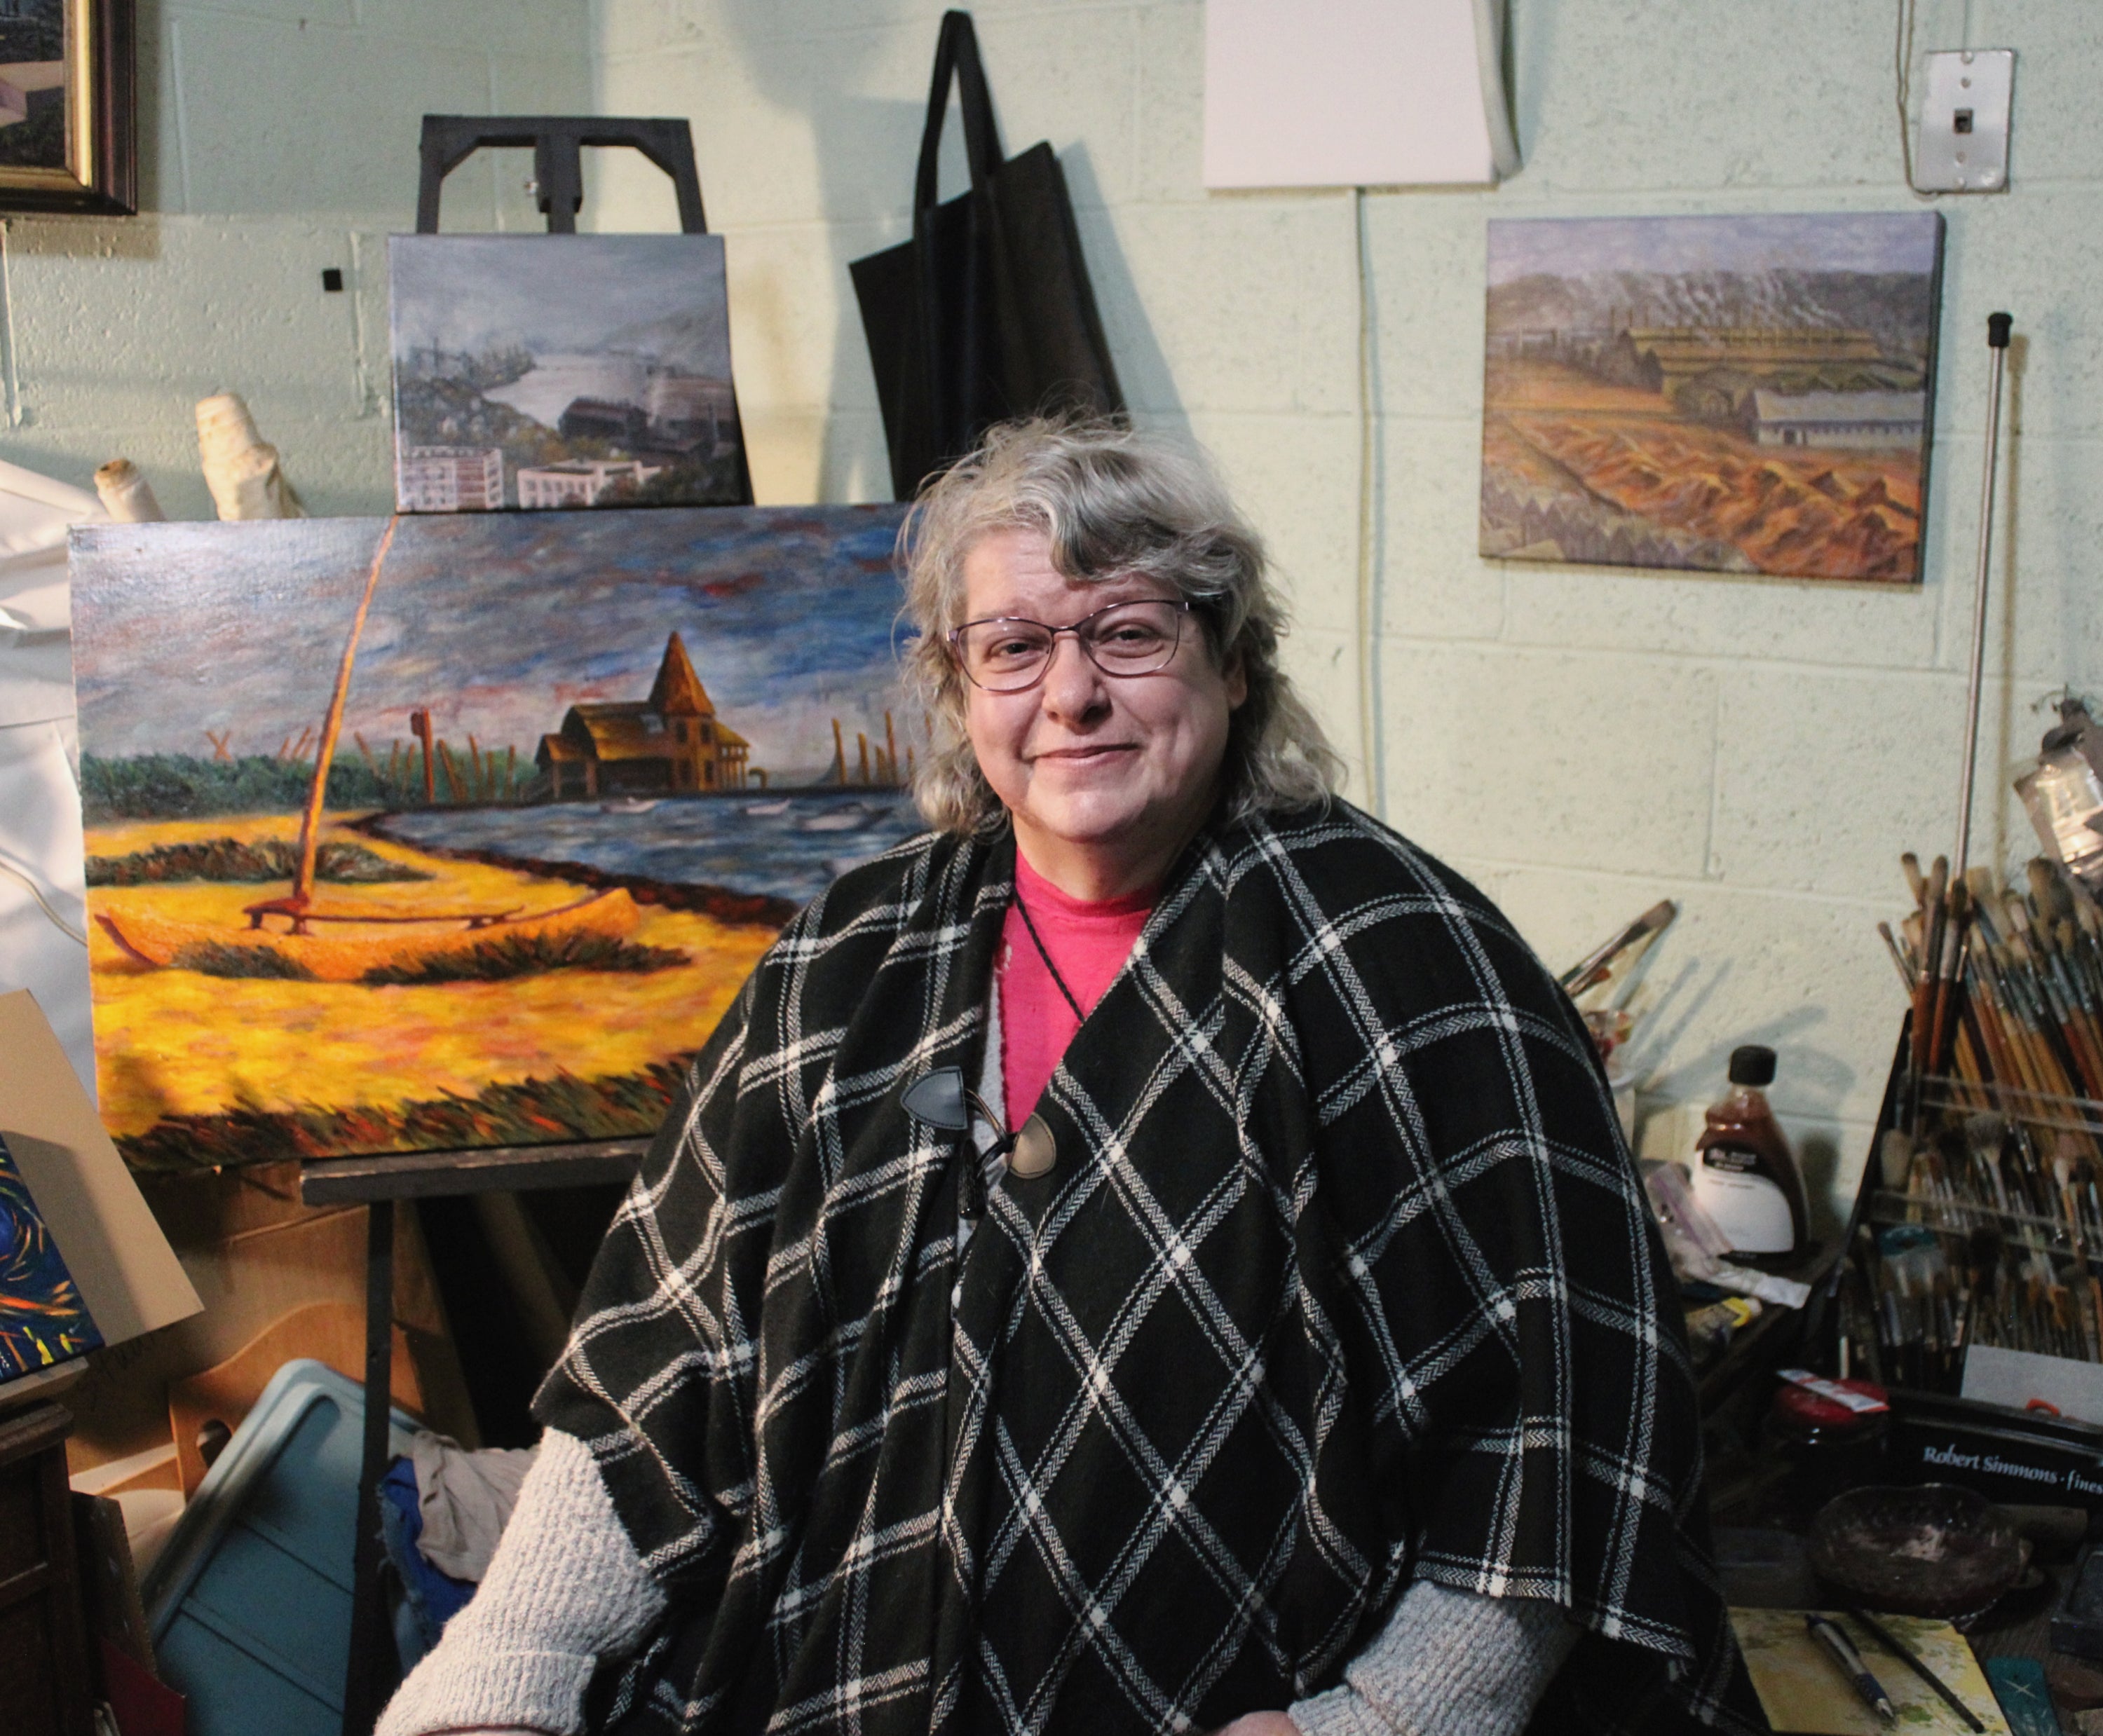 Me in my studio with some of my paintings.